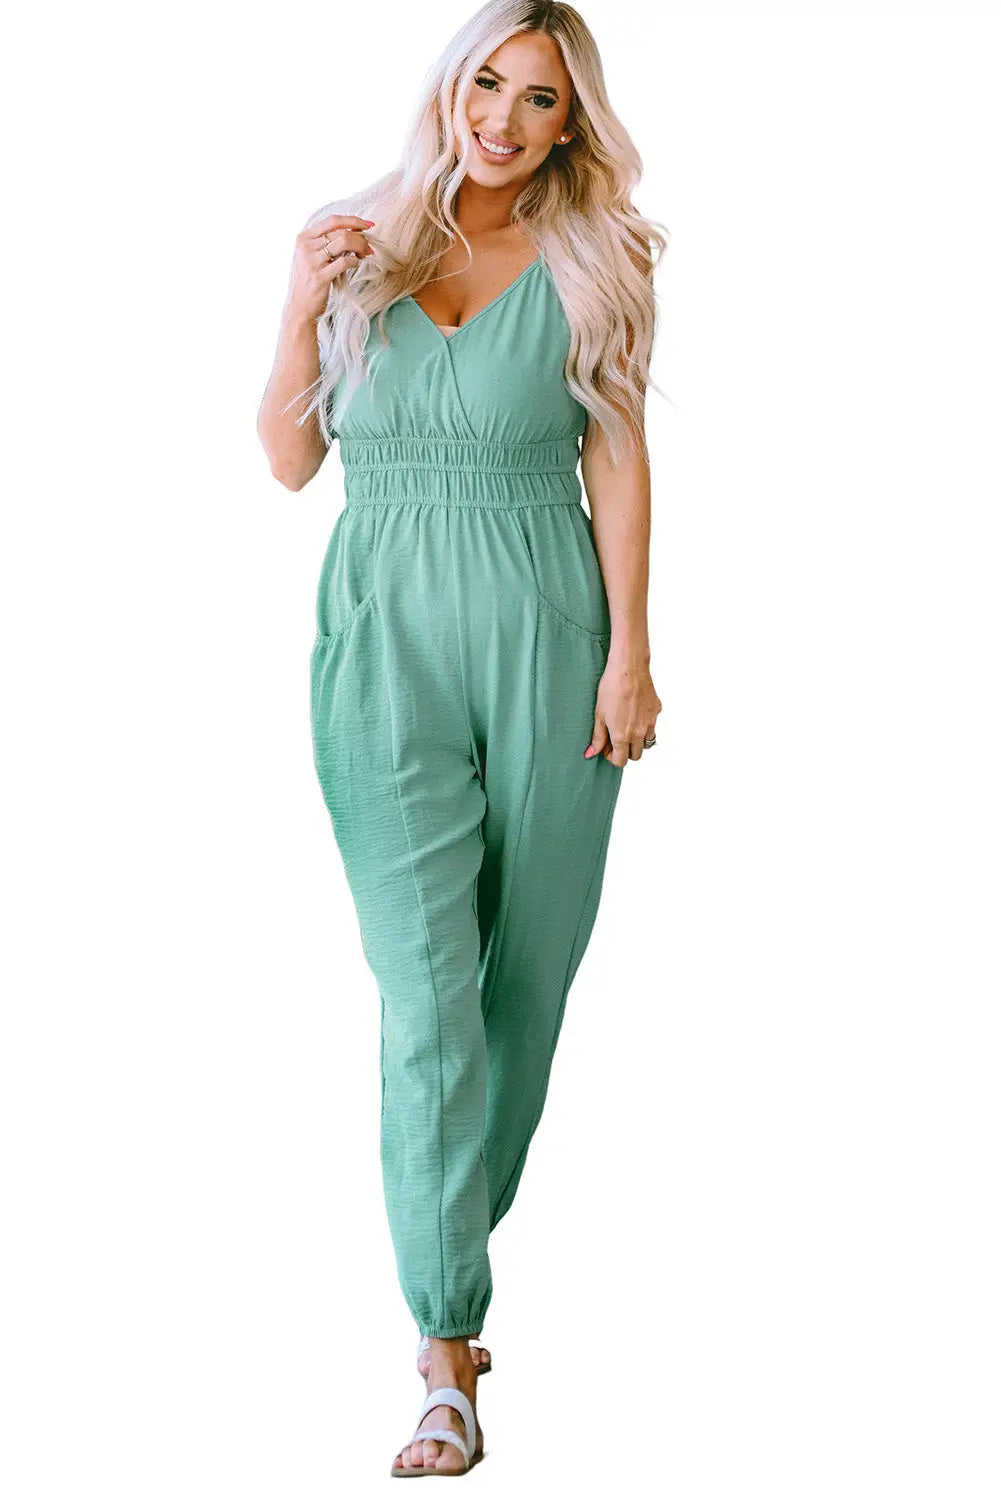 Green shirred high waist sleeveless v neck jumpsuit - jumpsuits & rompers